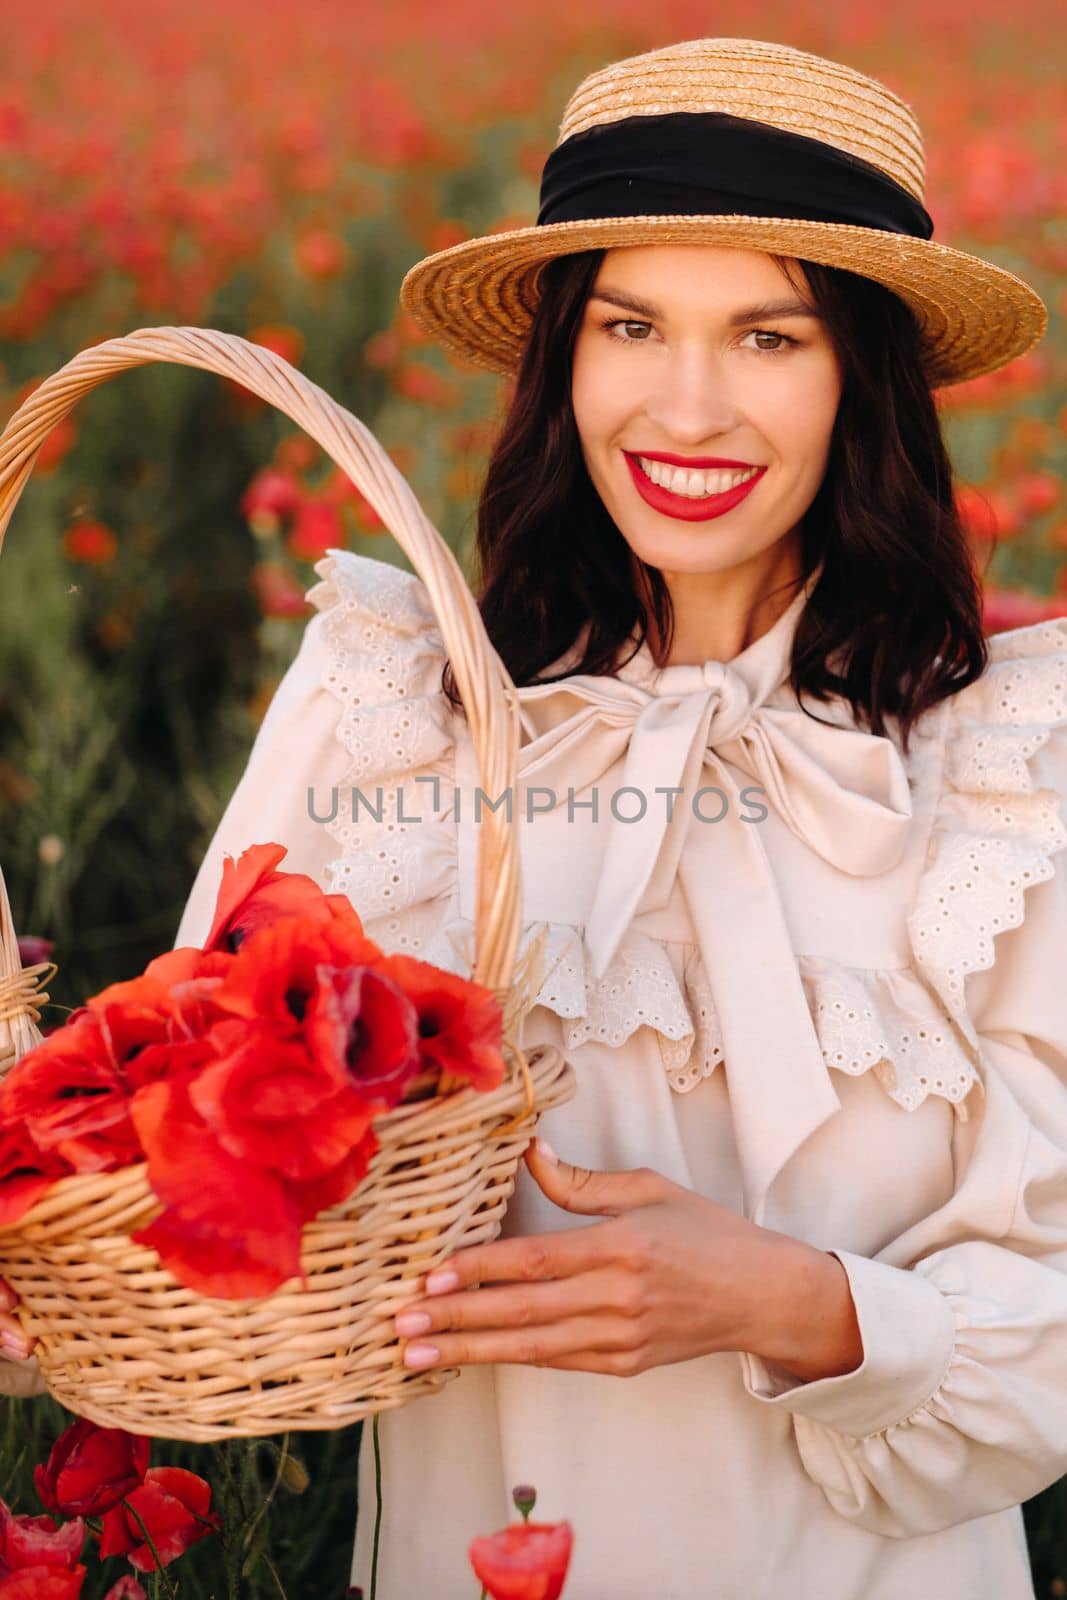 A girl in a white dress and with a basket of poppies walks through a poppy field.